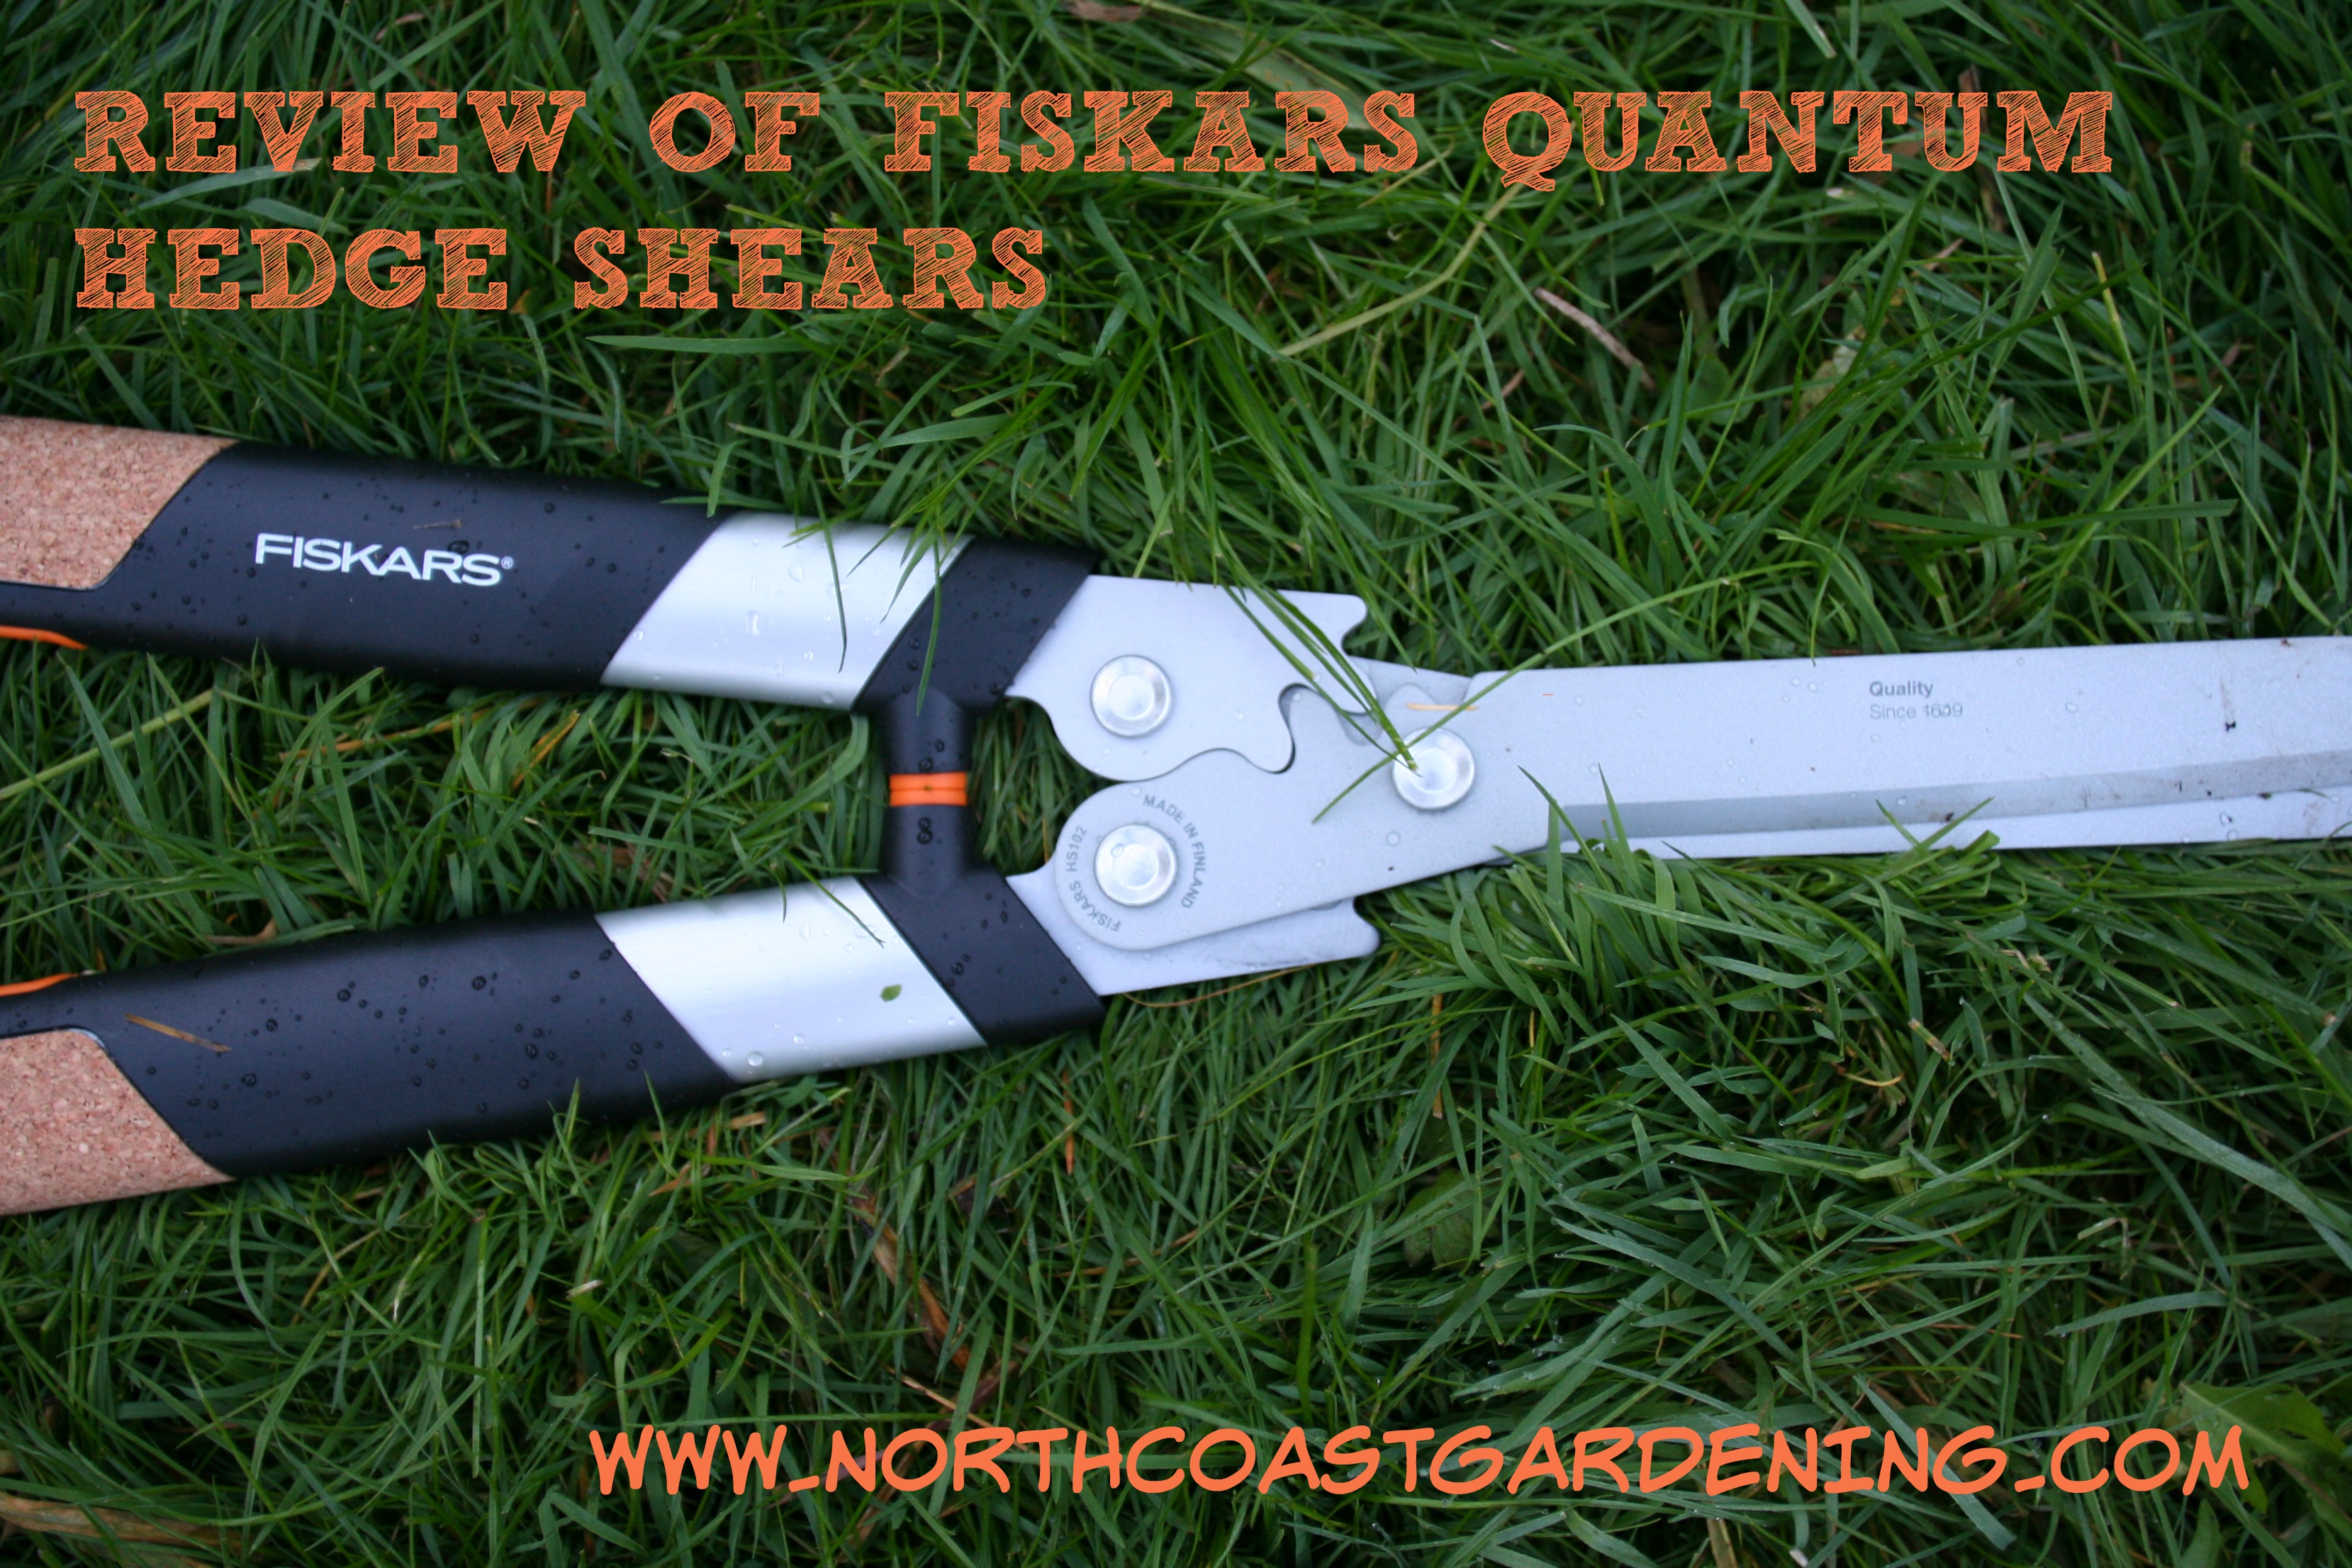 Review of Fiskars Quantum Hedge Shear: How Does it Compare to the PowerGear Model?